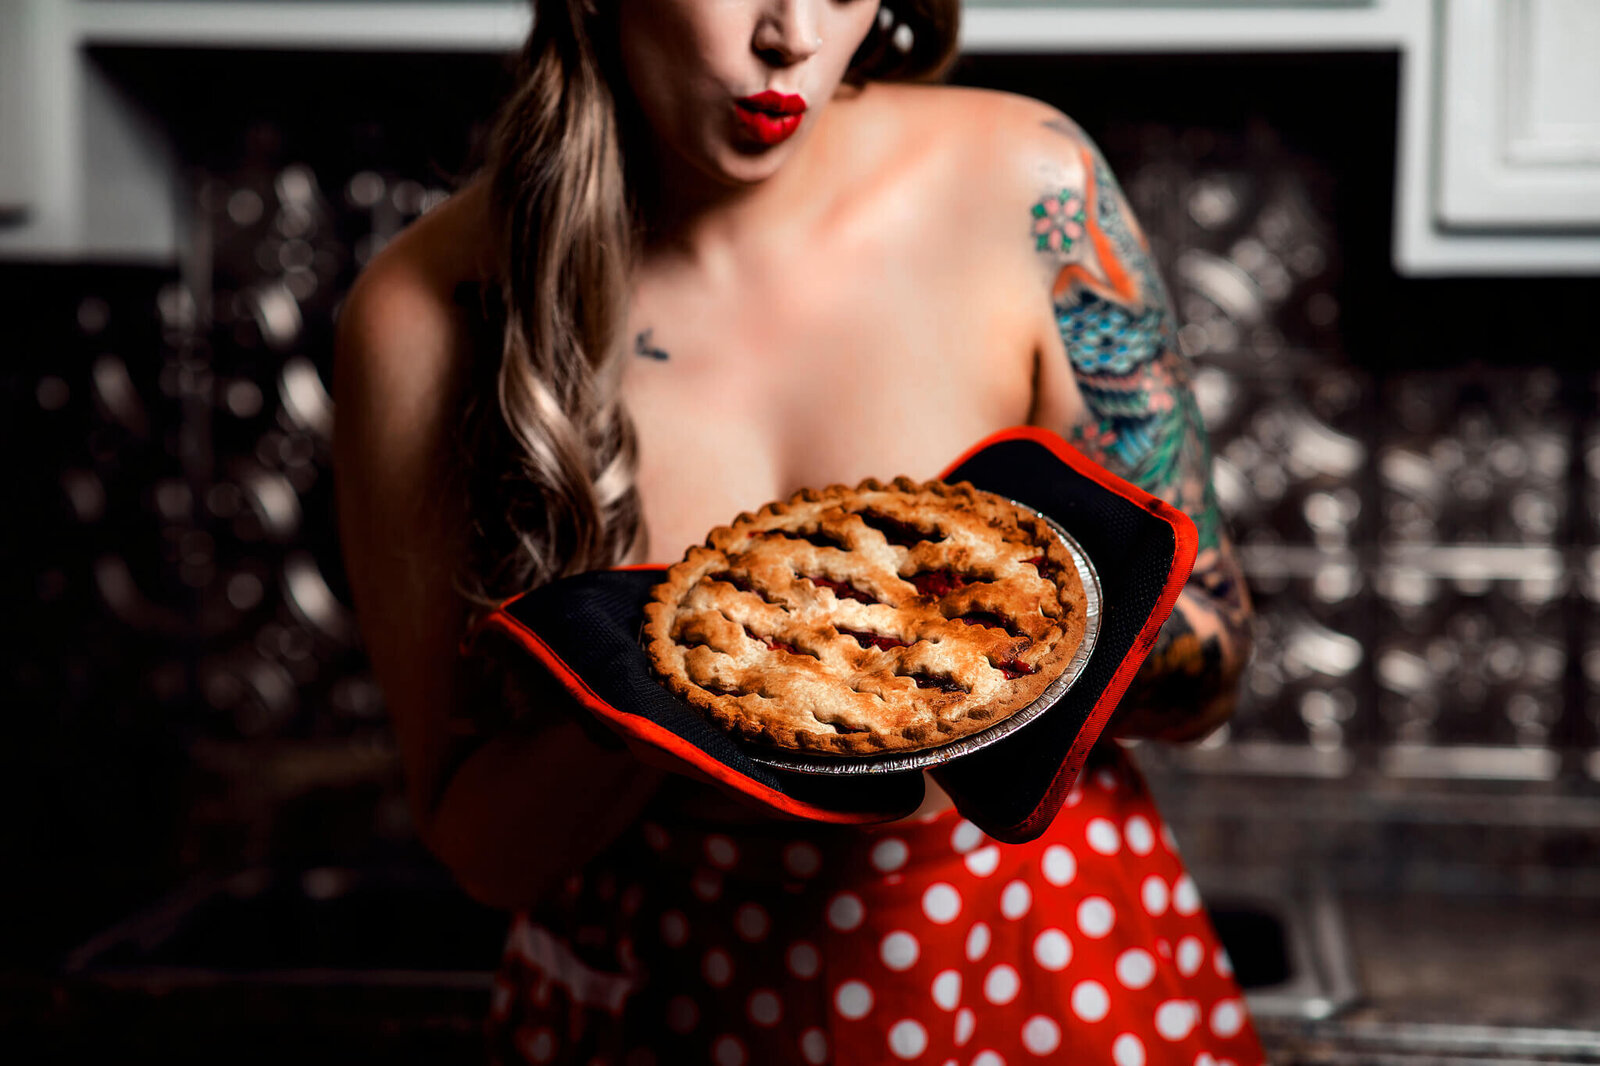 Katharina Held Photography, Bloomintgon, IL, Boudoir, pinup, polka dots, pie